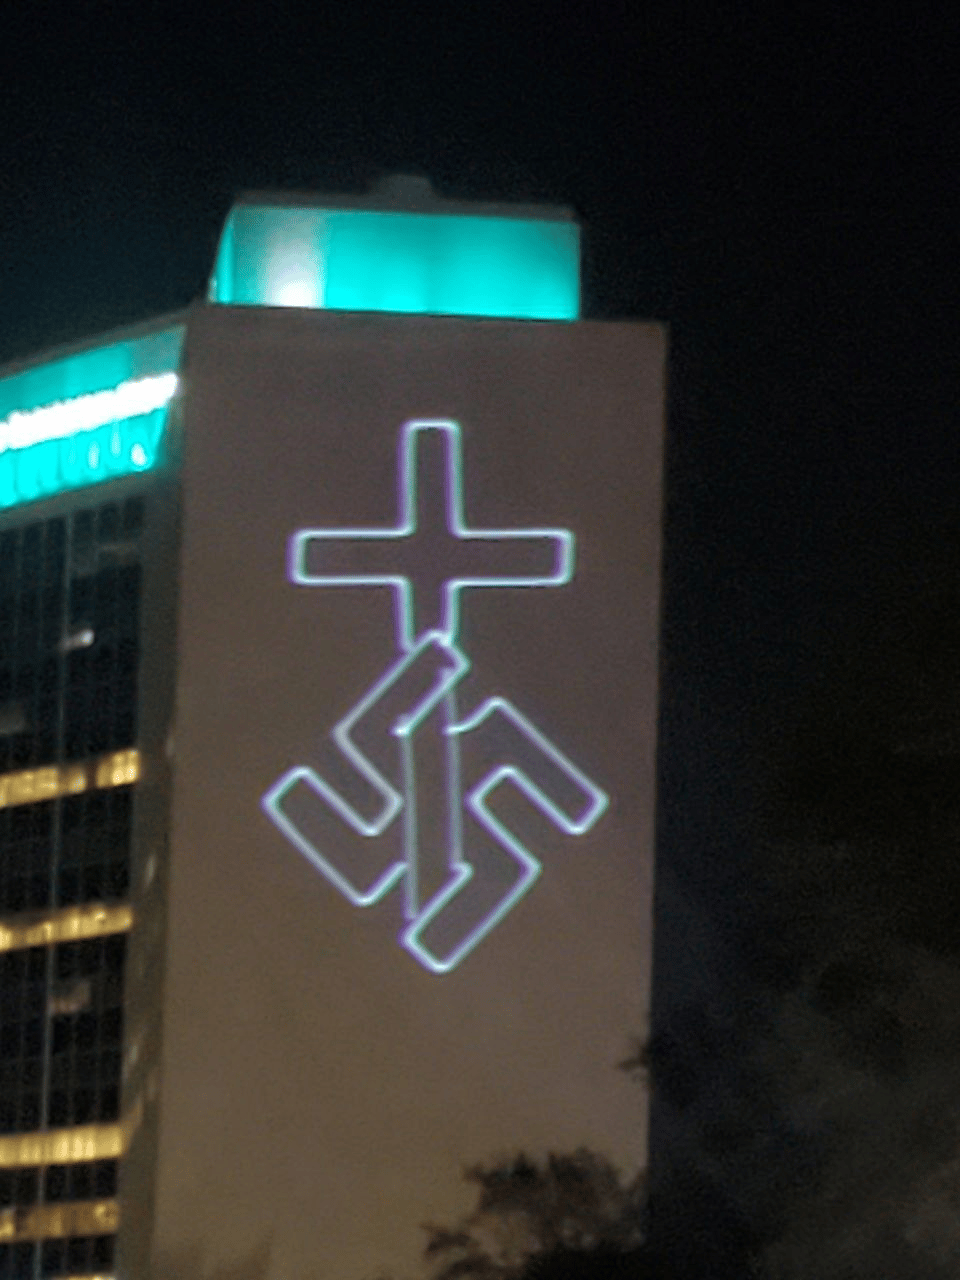 (Photos) Anti-Semitic Imagery Projects on the CSX Headquarters Building in Northbank Area, Jacksonville, Florida - 14 January 2023